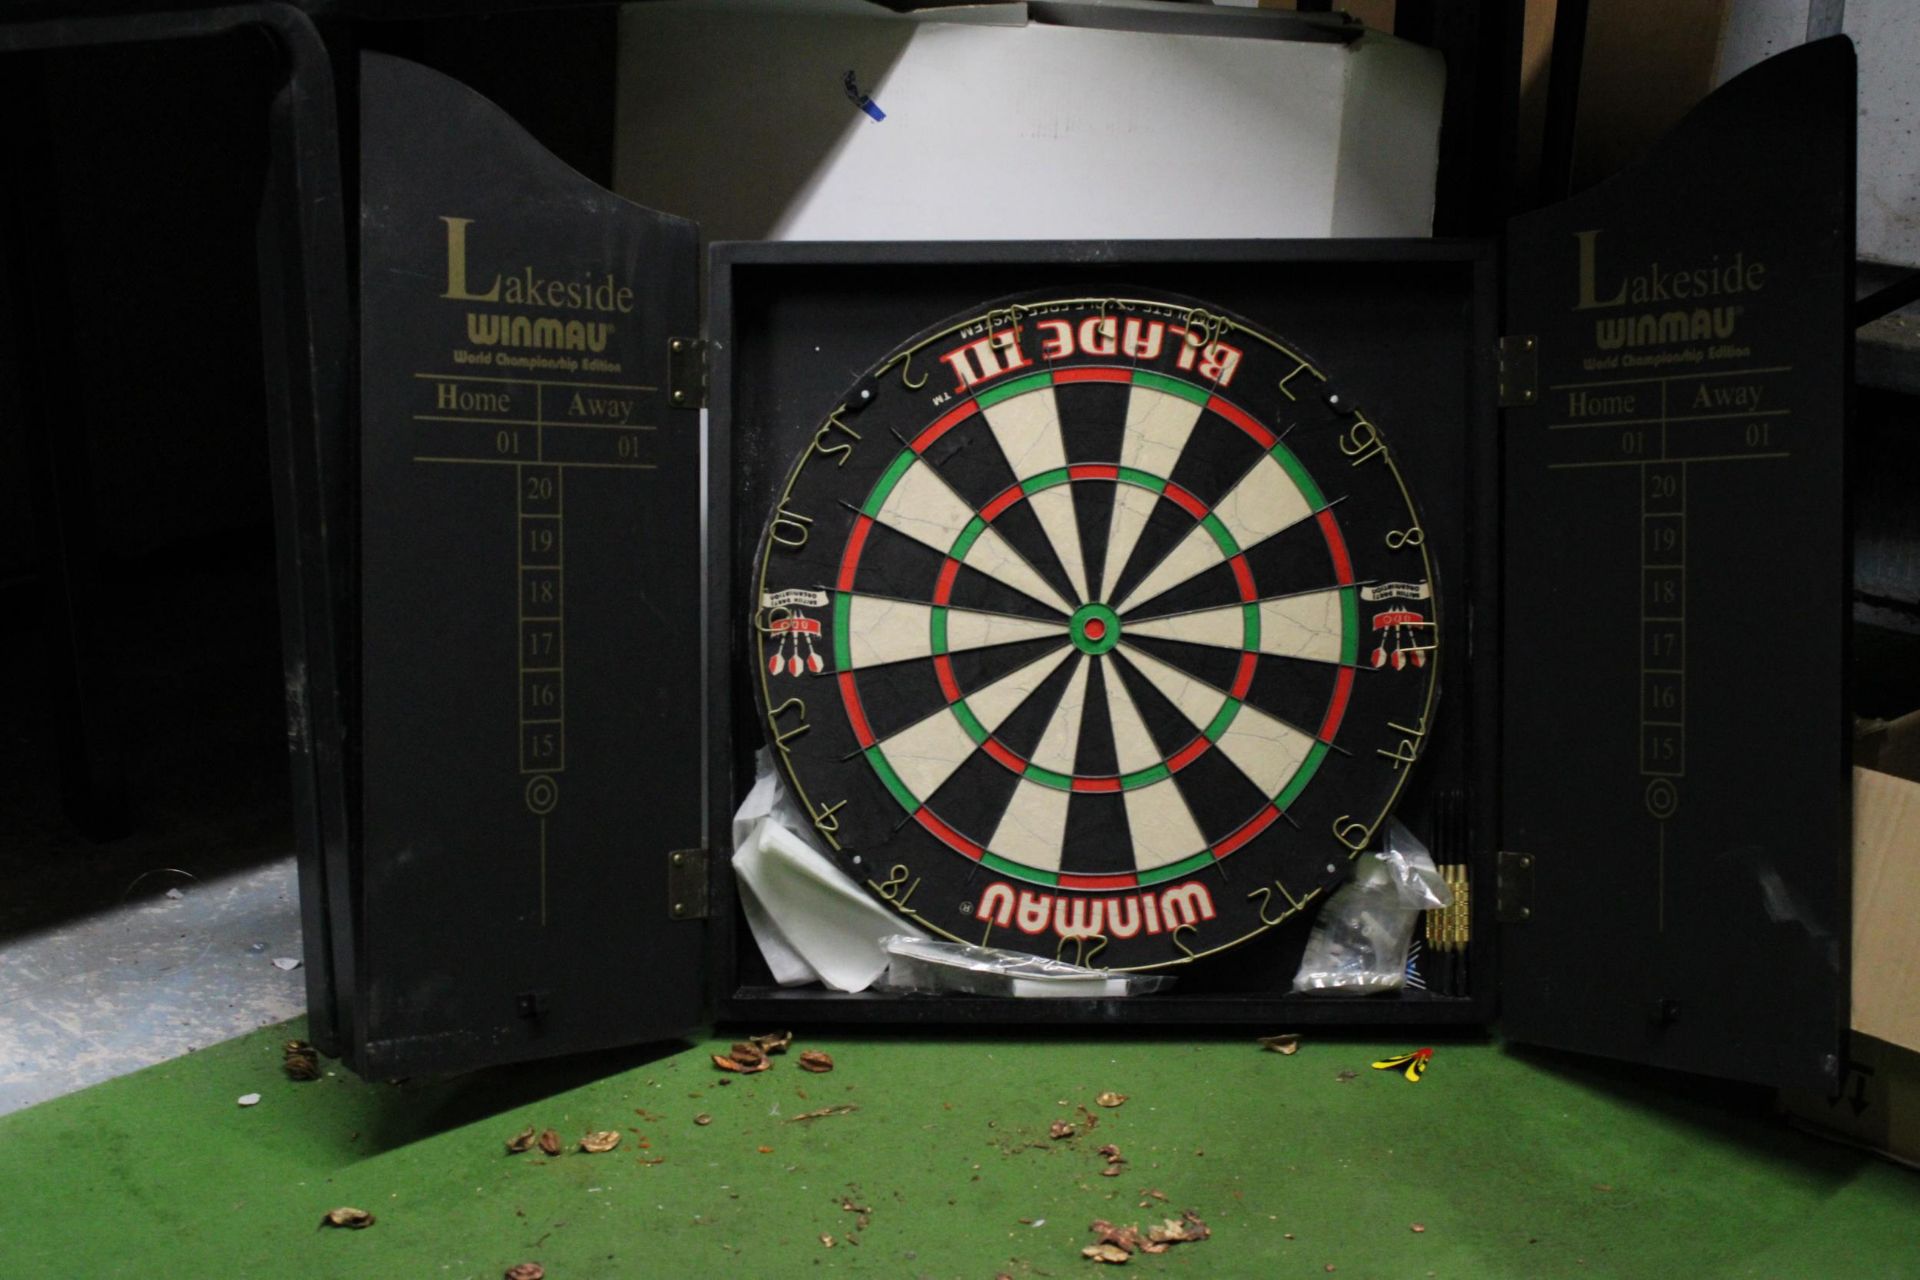 A LAKESIDE WINMAU WORLD CHAMPIONSHIP EDITION DARTBOARD IN WOODEN CASE - Image 2 of 2